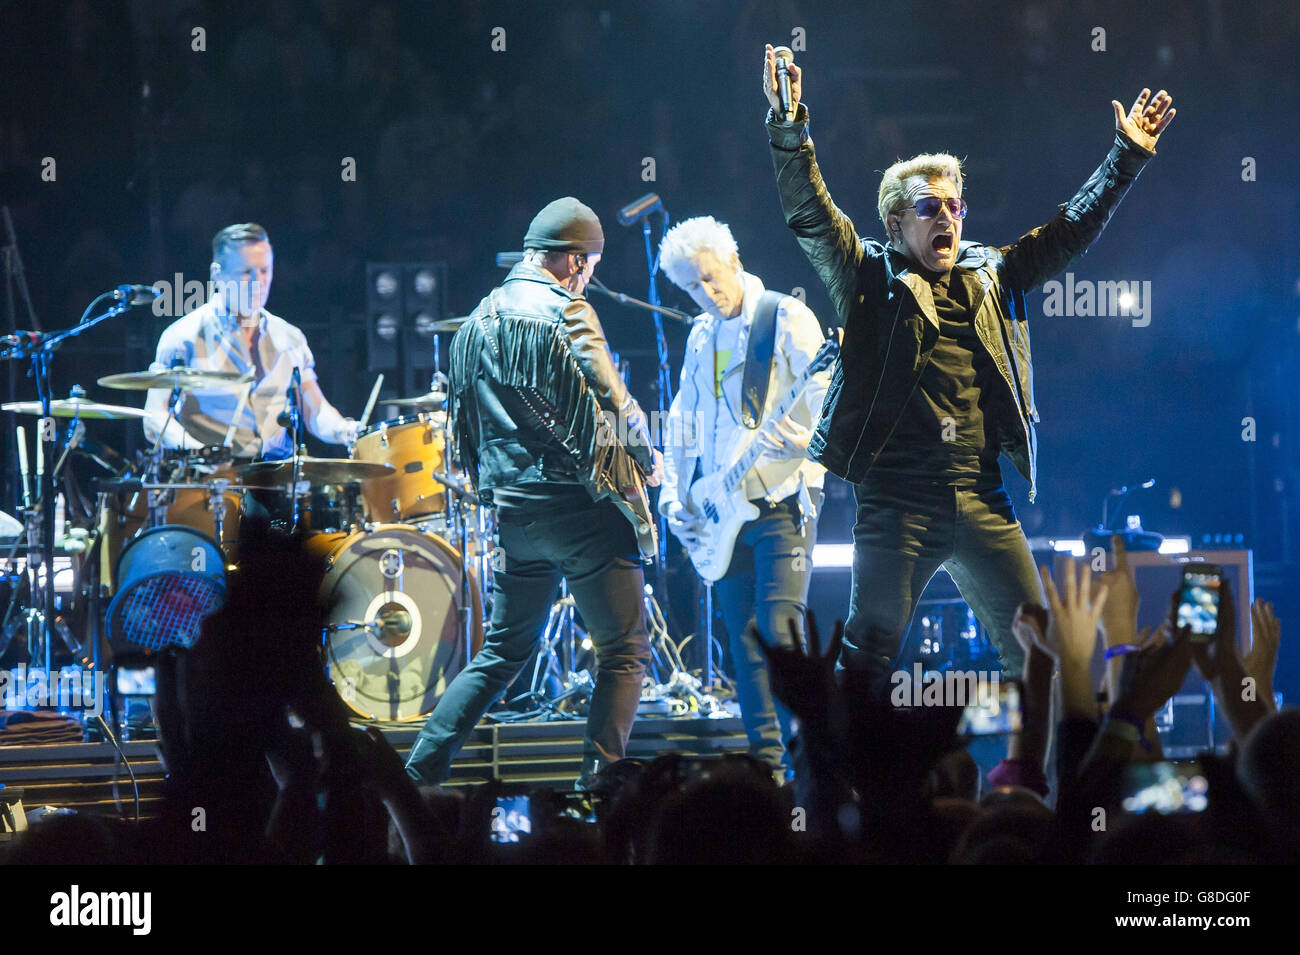 U2 performing during their Innocence + Experience tour at the O2 arena in Greenwich, London. Stock Photo